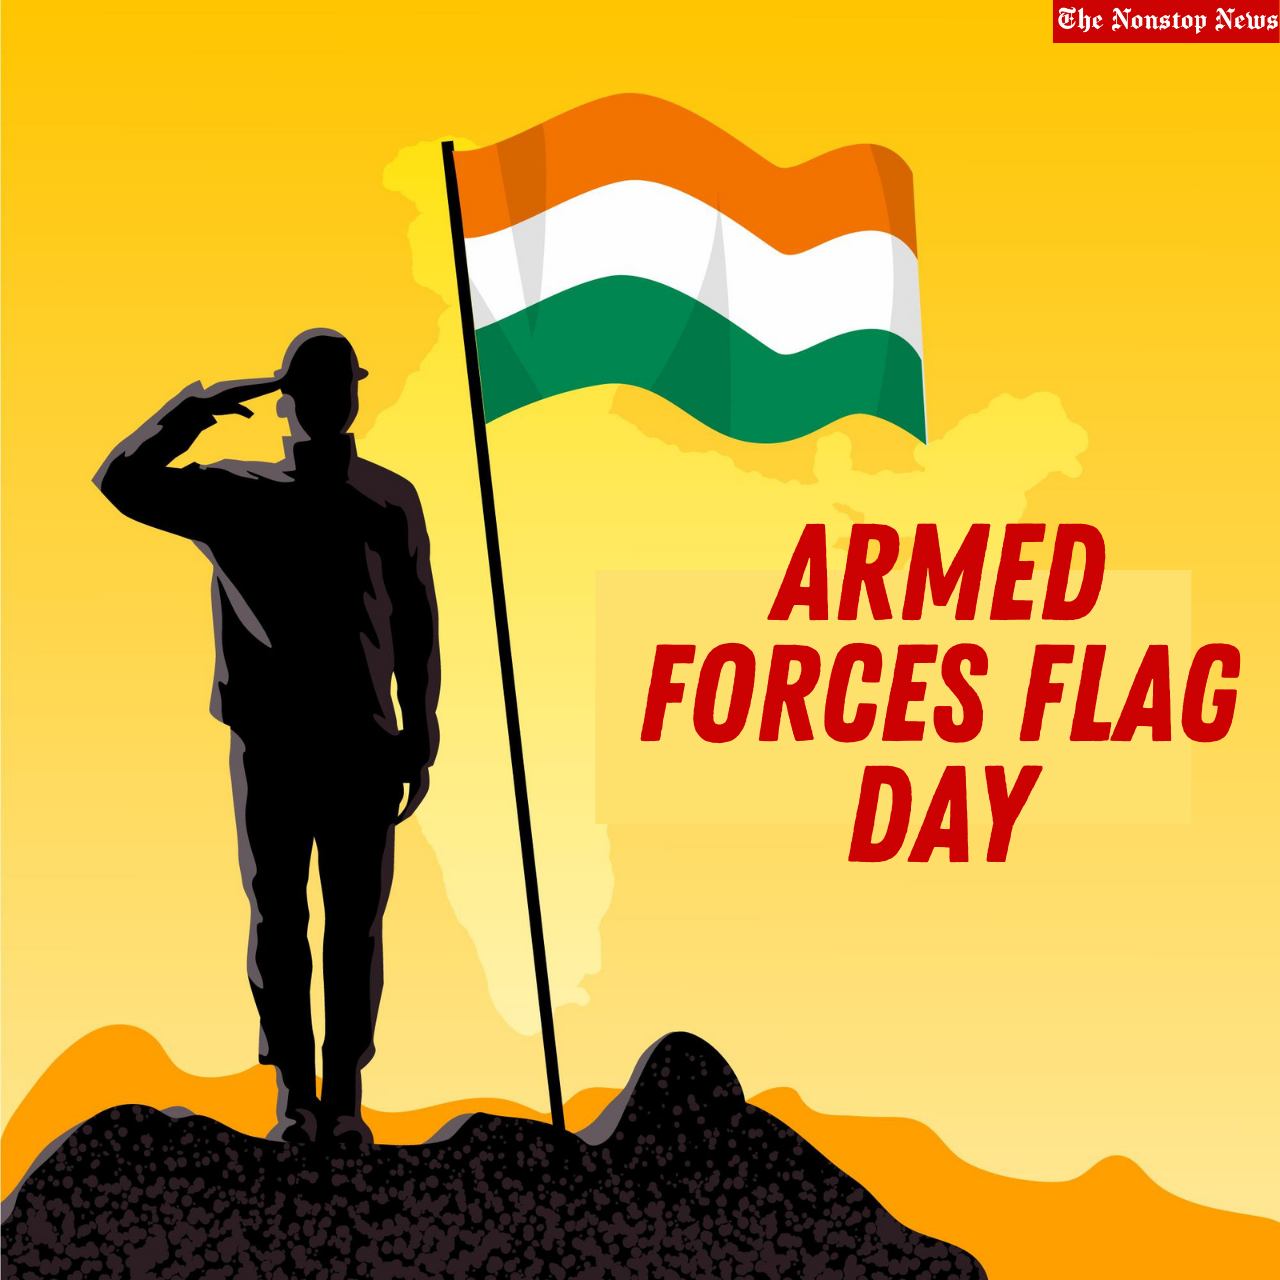 Armed Forces Flag Day 2021 Quotes, Wishes, HD Images, Messages, and greetings to Share